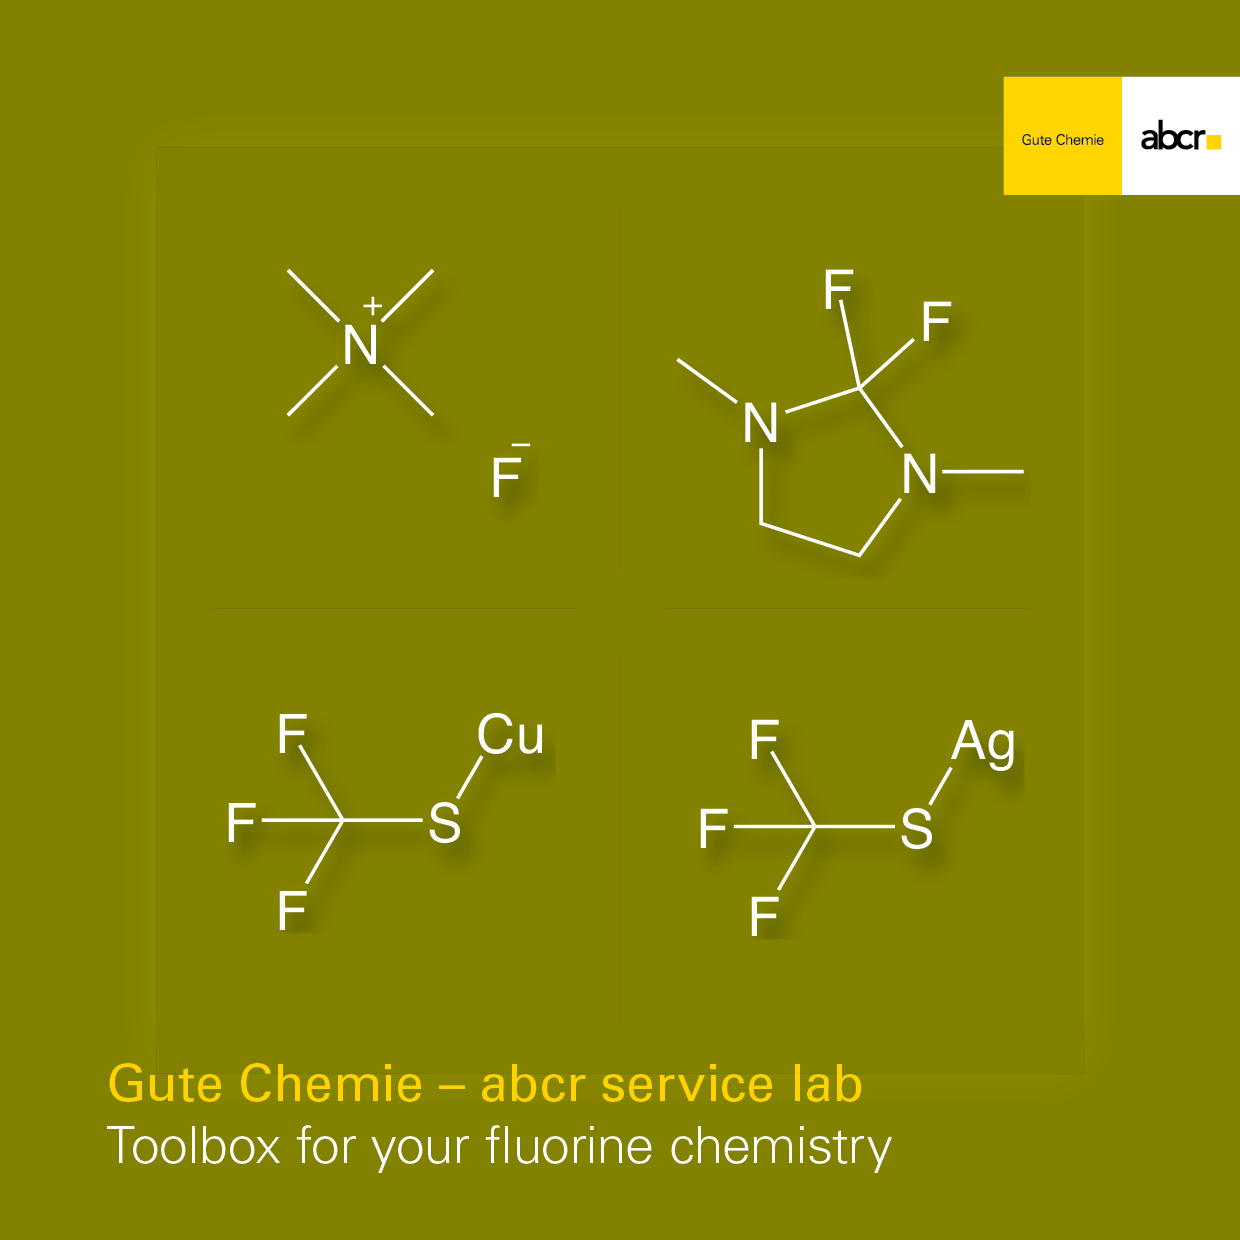 Toolbox for your fluorine chemistry - abcr service lab